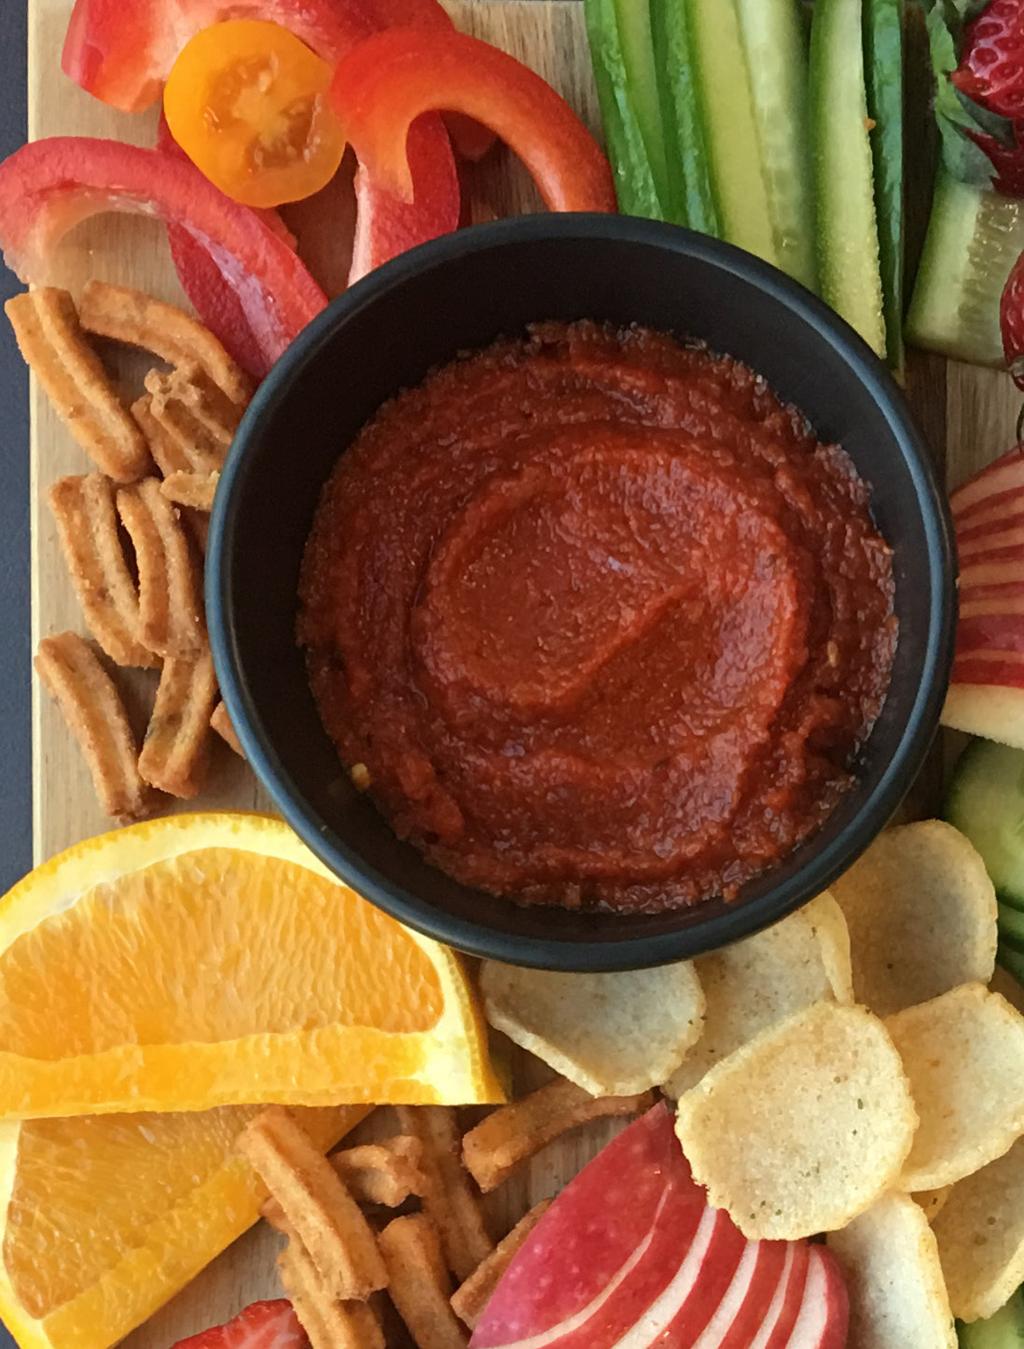 Dip 1 Roasted Sweet Capsicum Dip Serves 1 INGREDIENTS 1 red capsicum 1 red onion, cut in half with skins attached 1 carrot, cut into 4 pieces 1 clove garlic, skin on Spray oil Pepper ½ tsp coriander